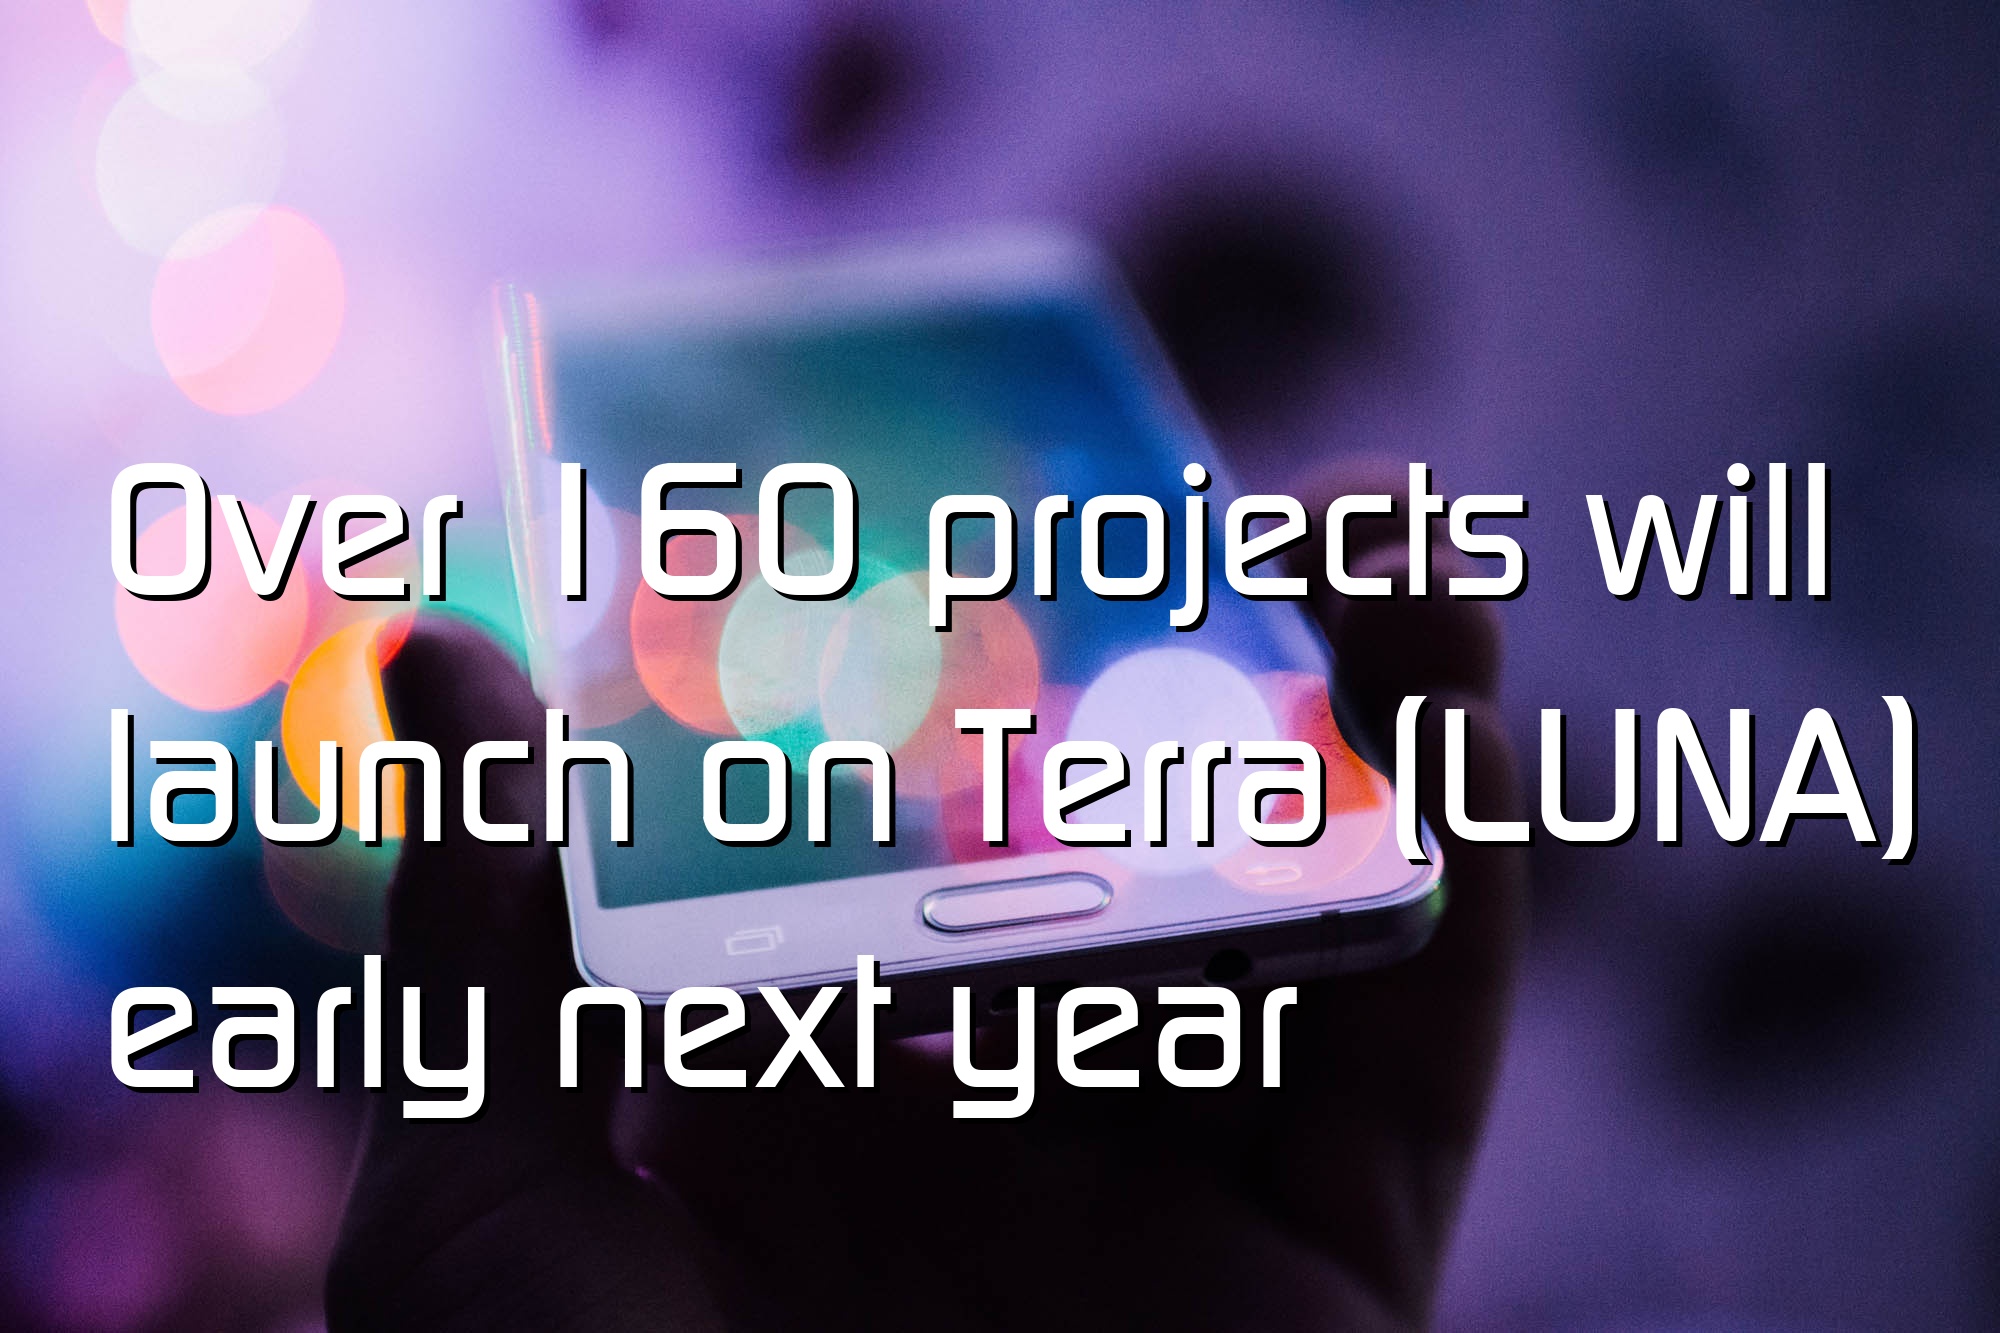 @$61,911.5: Over 160 projects will launch on Terra (LUNA) early next year